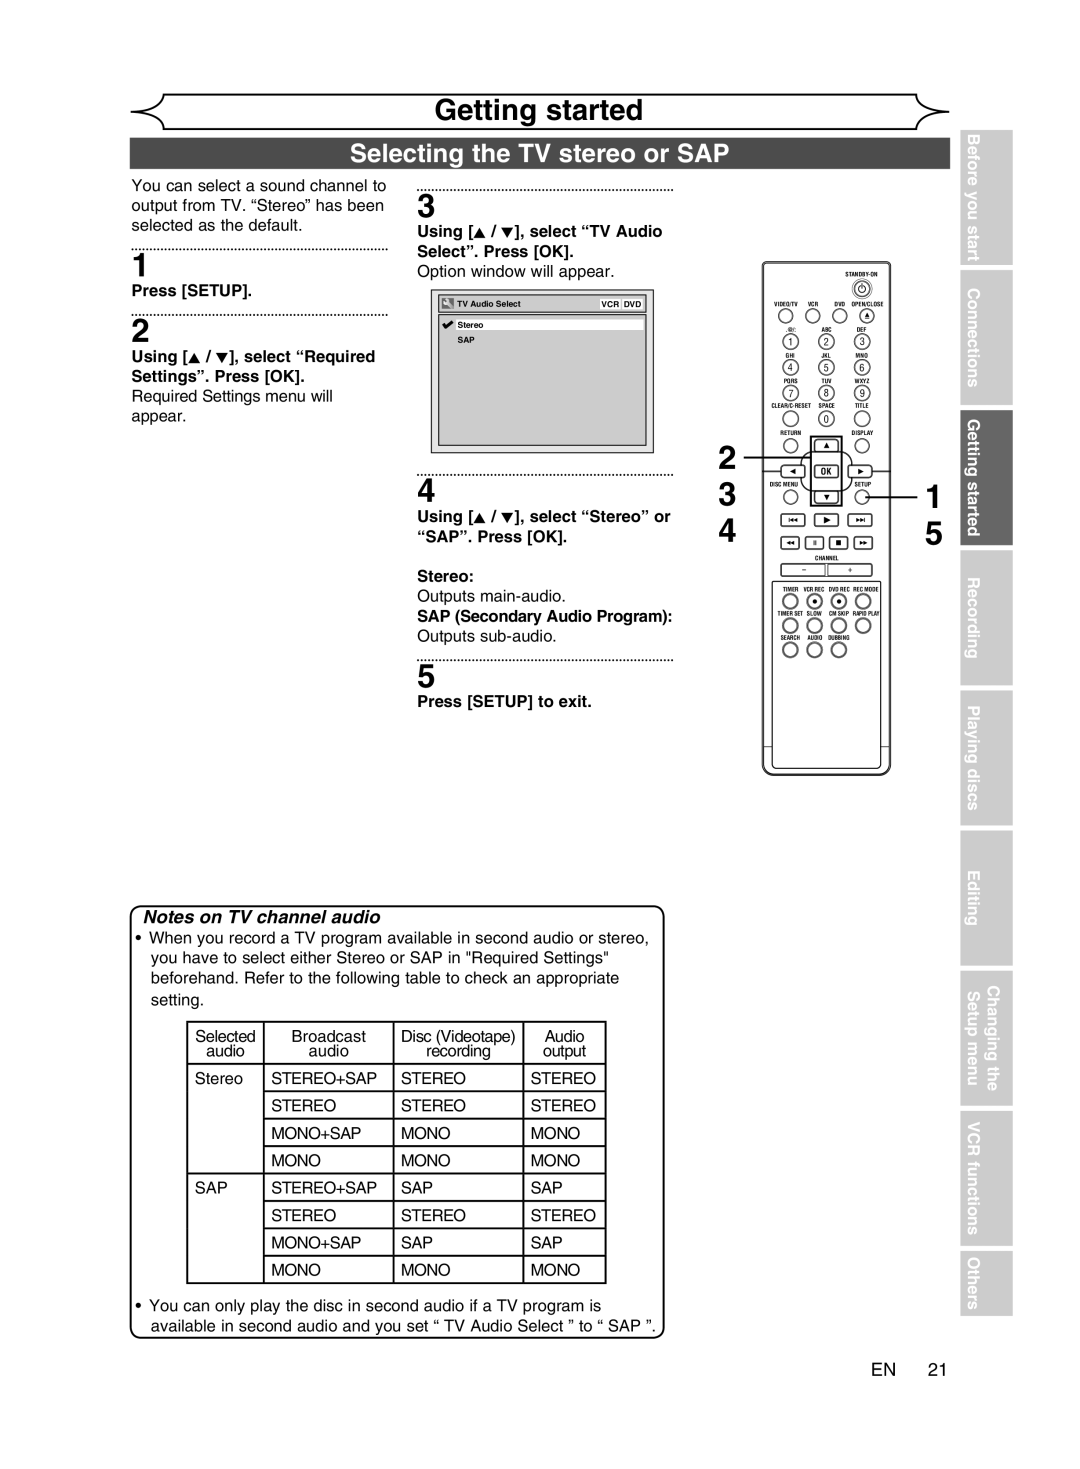 Magnavox cmwR20v6 manual Selecting the TV stereo or SAP, Getting started, Notes on TV channel audio, you start, Connections 